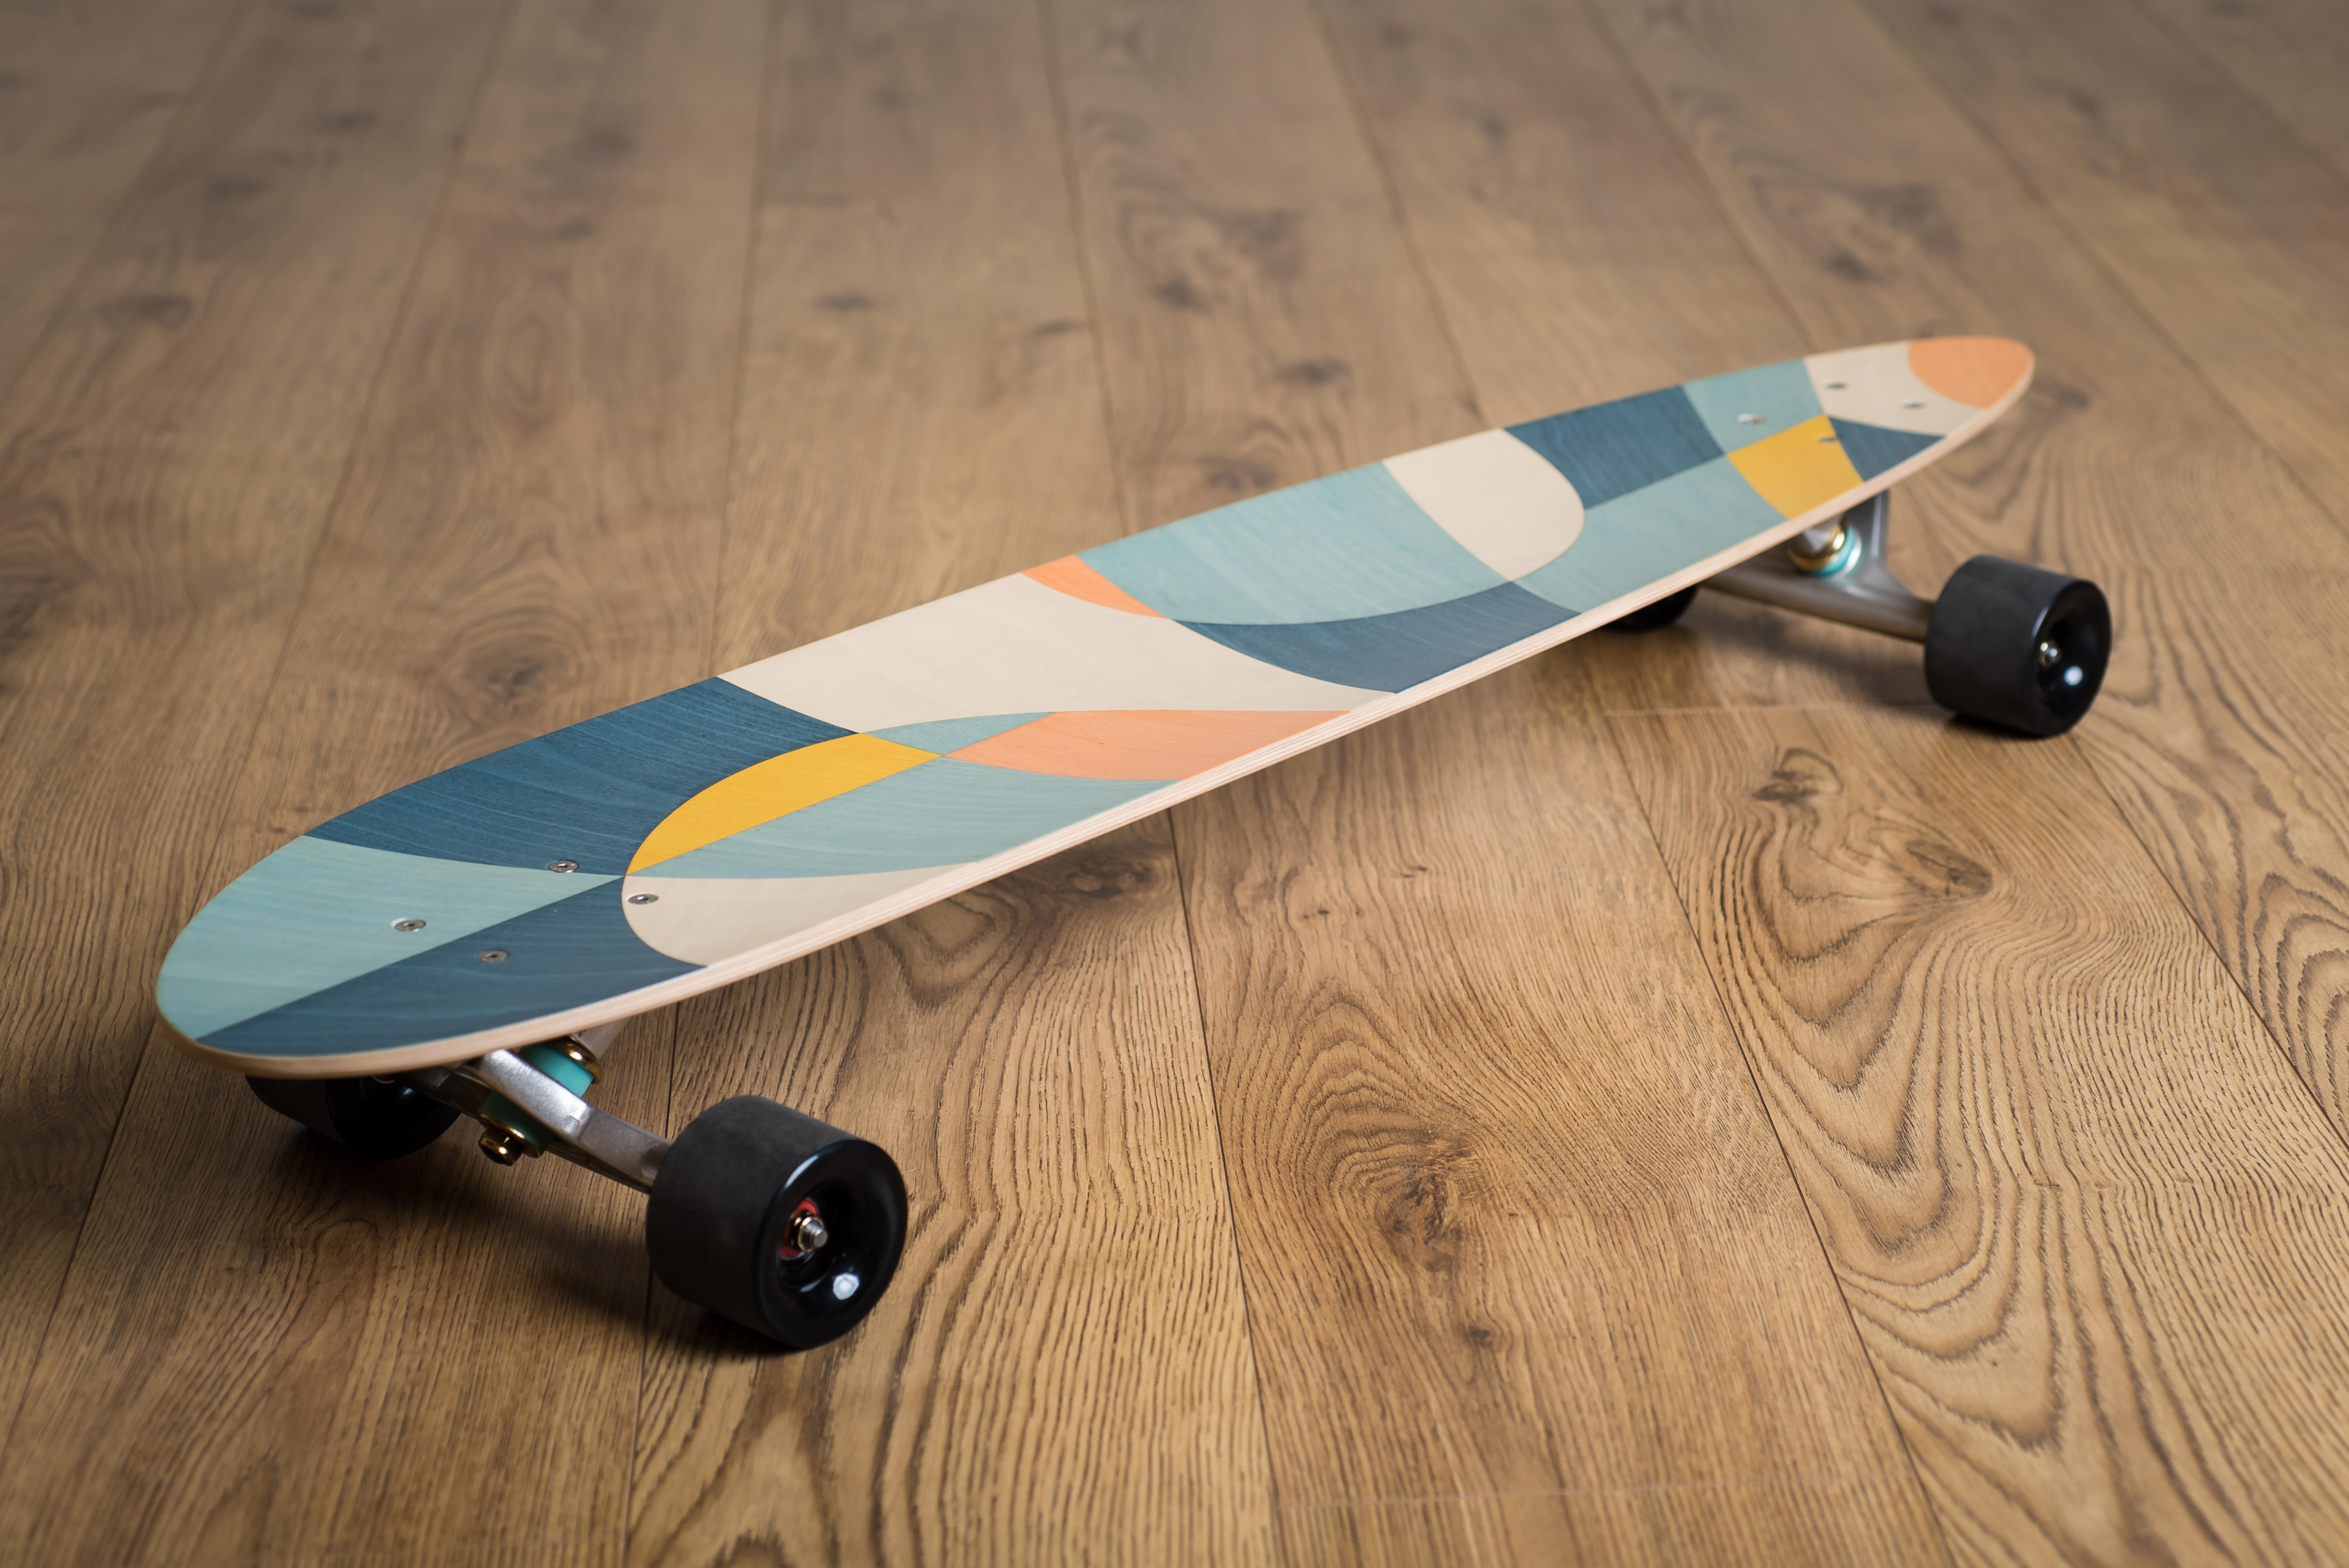 The w o o d p o p pintail longboards are handcrafted in workshops on either side of the Welsh/English border the UK. Each one is made from best quality Finnish Birch and vacuum laminated to form a concave deck featuring a unique marquetry inlay